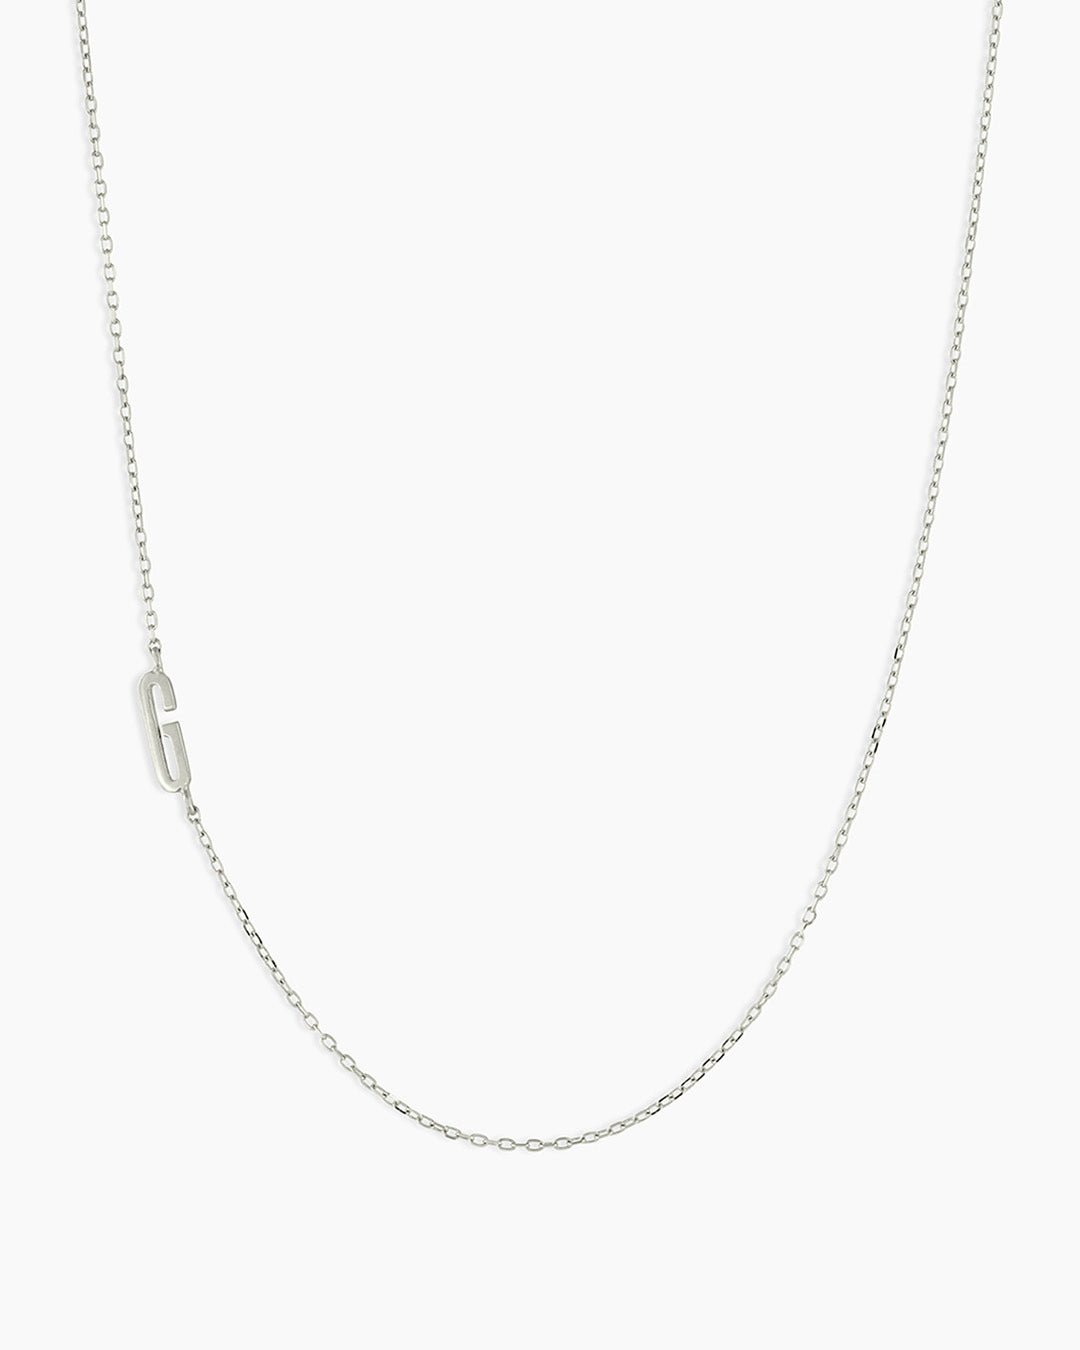 Woman wearing Alphabet Necklace || option::14k Solid White Gold, G